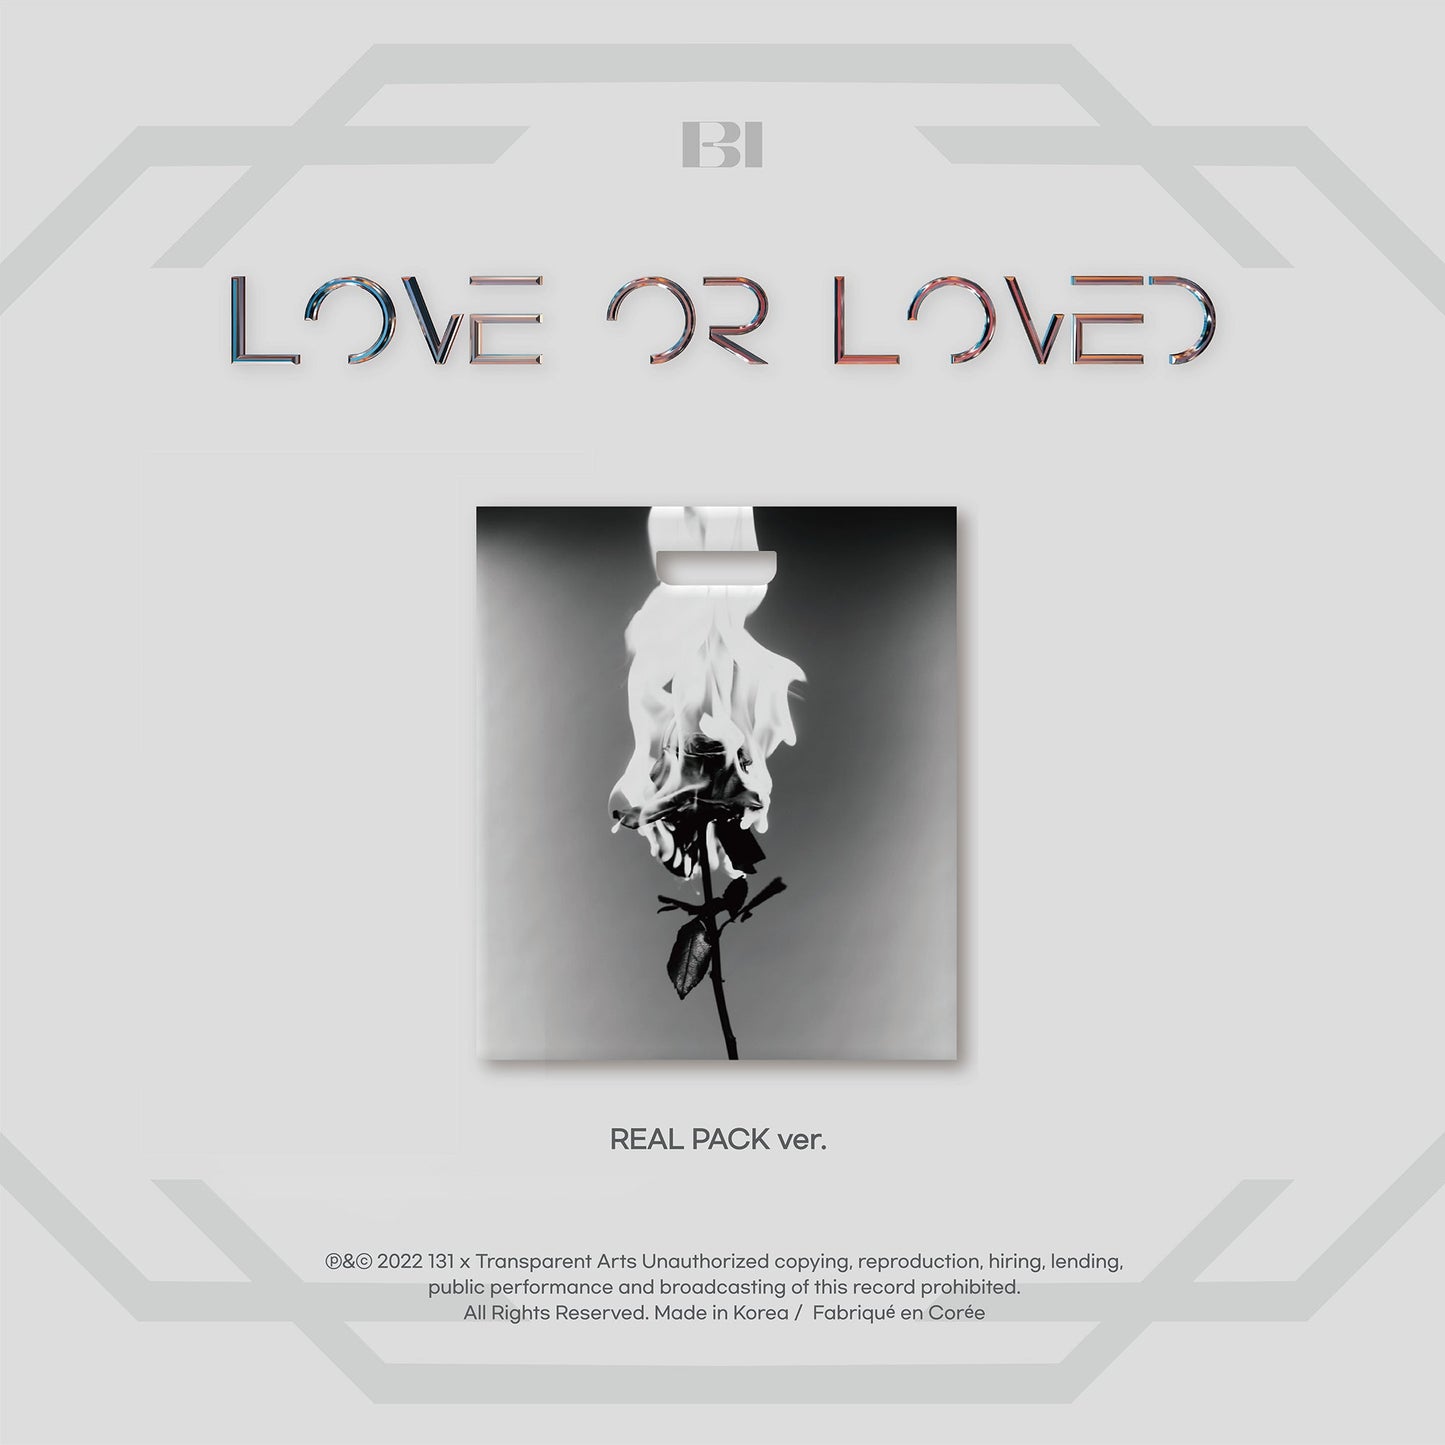 B.I ALBUM 'LOVE OR LOVED PART.1' REAL PACK VERSION COVER